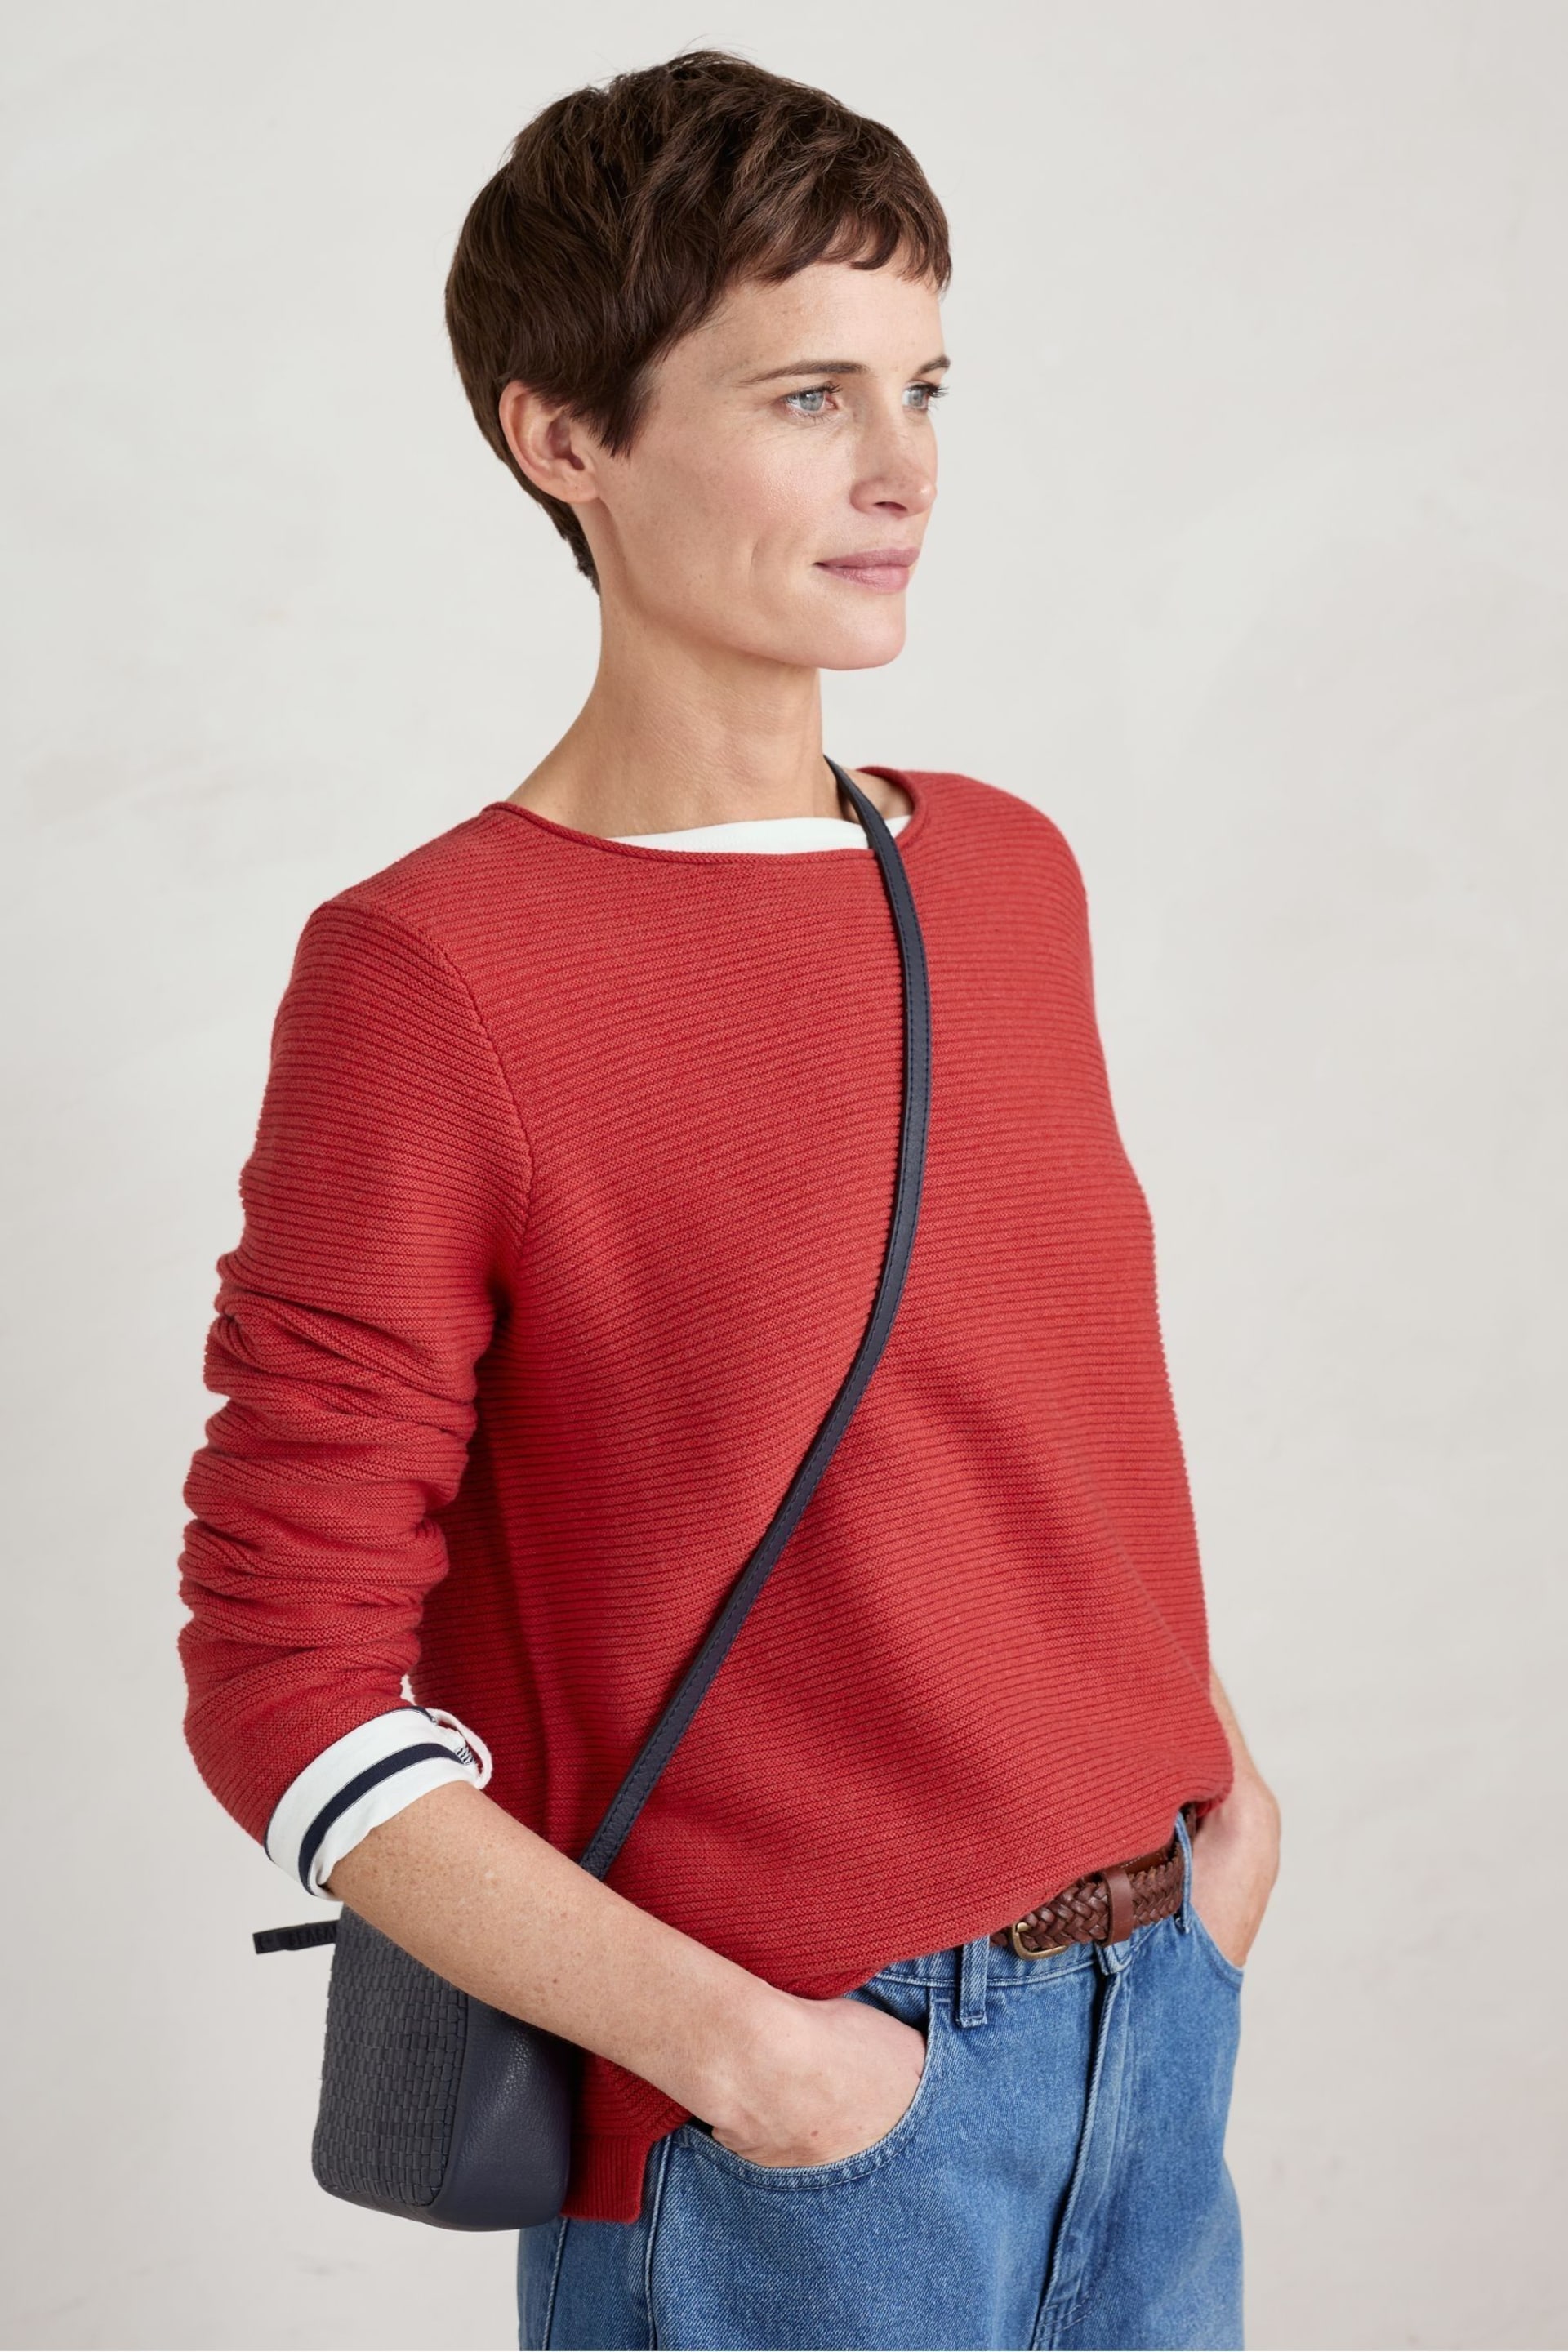 Seasalt Cornwall Red Makers Cotton Jumper - Image 3 of 5